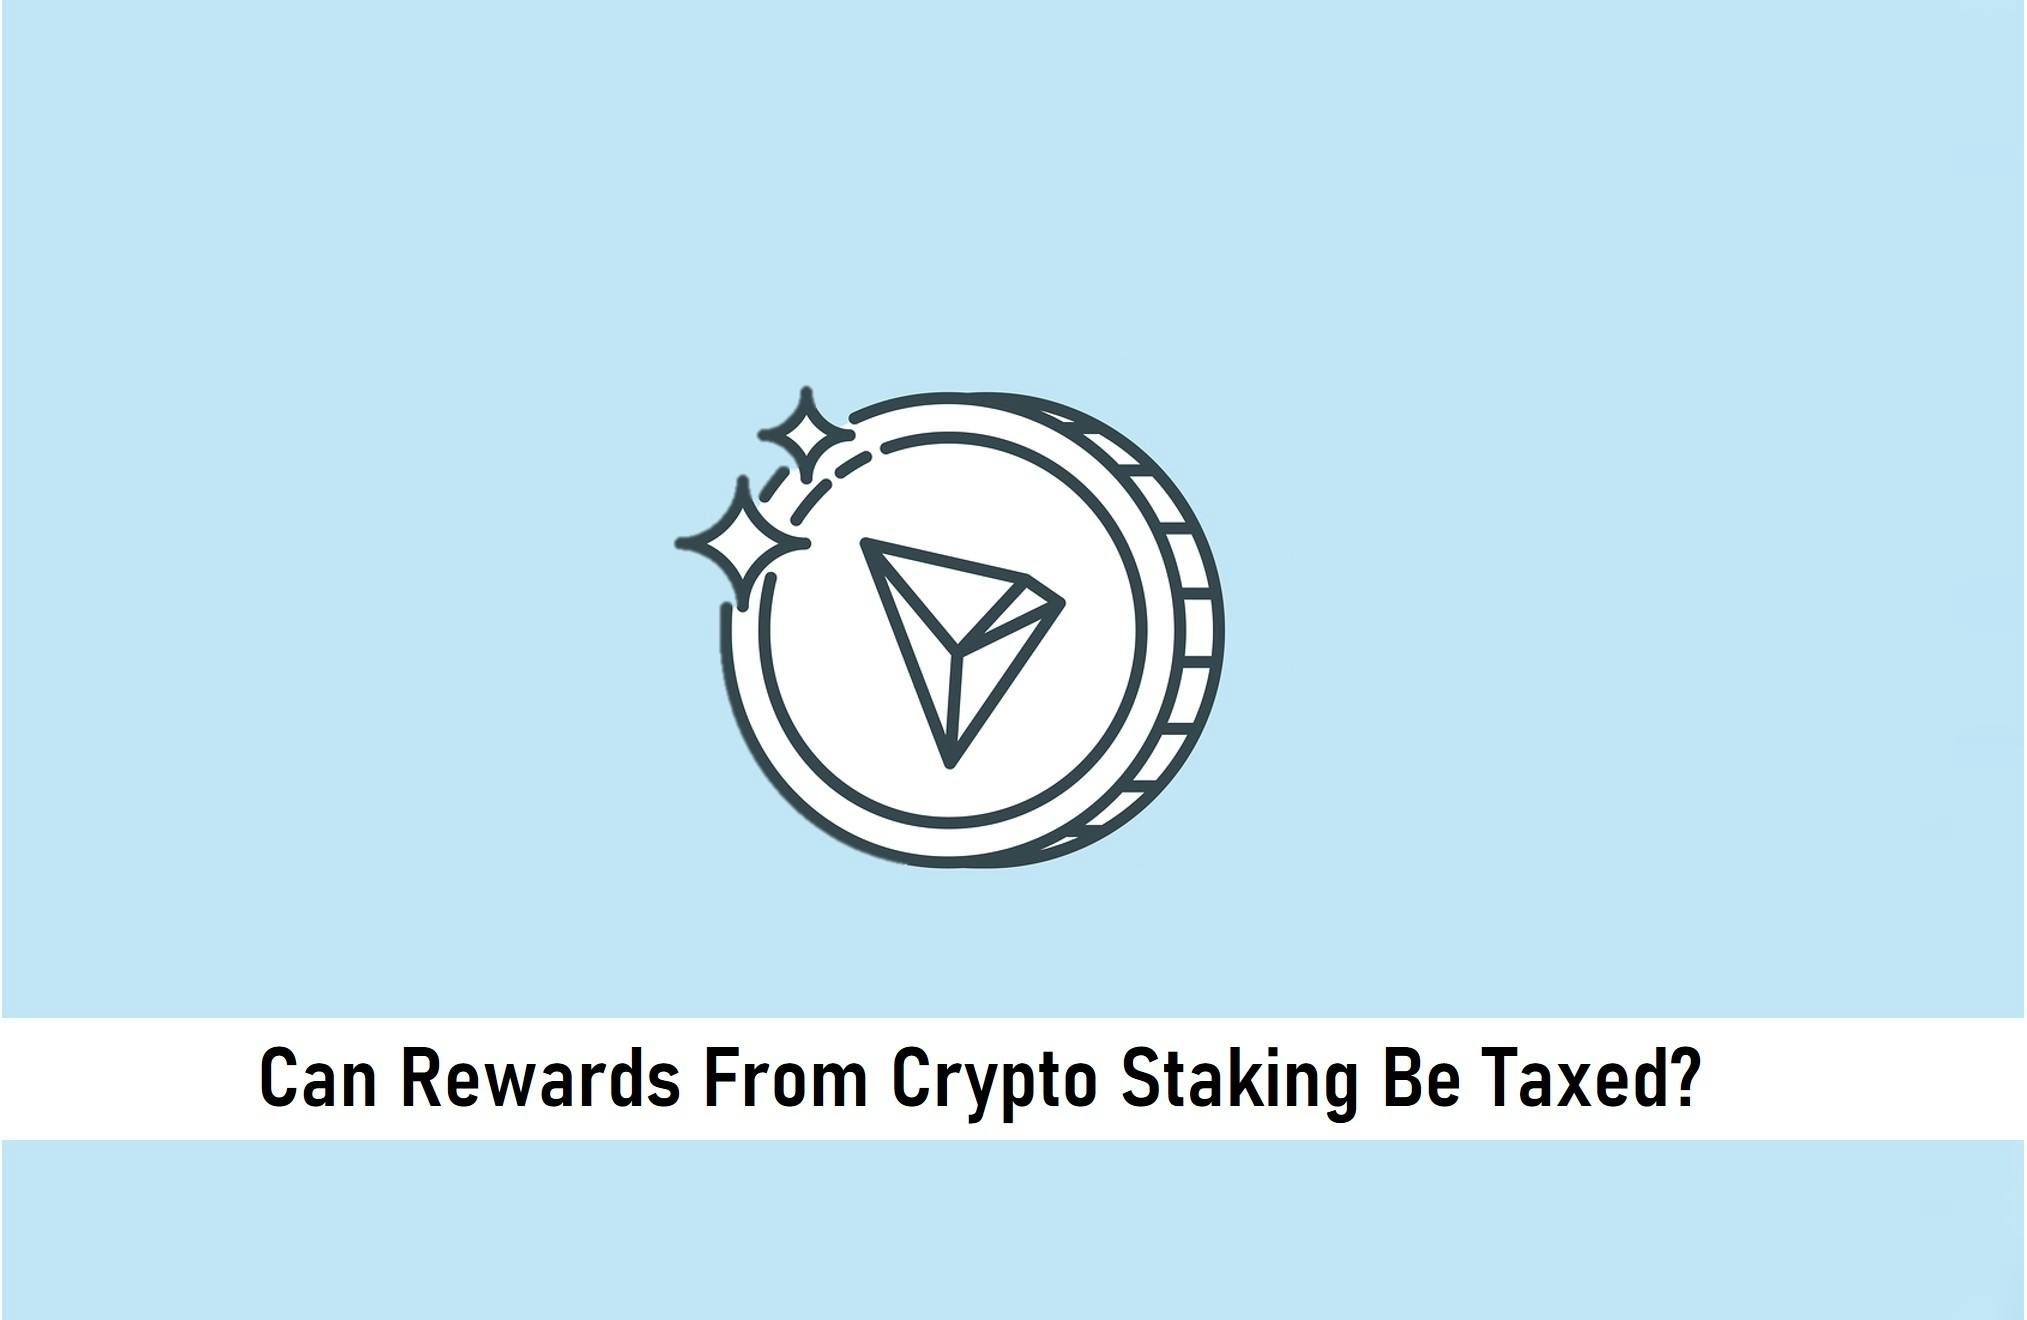 Can Rewards From Crypto Staking Be Taxed?